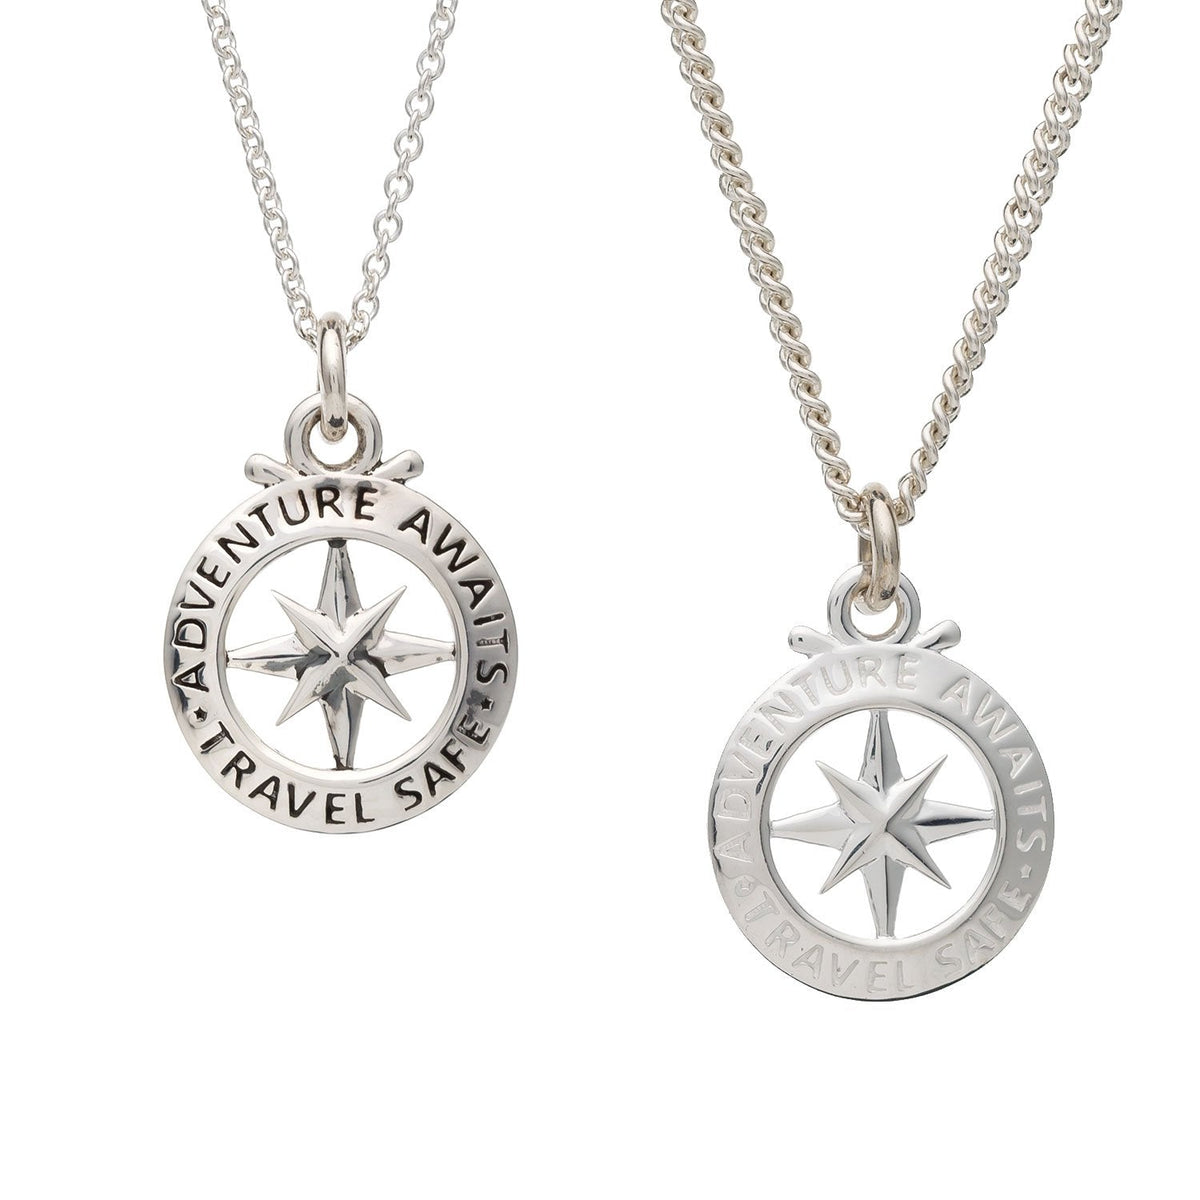 Small man&#39;s compass necklace alternative to a St Christopher travel gift from Off The Map Jewellery